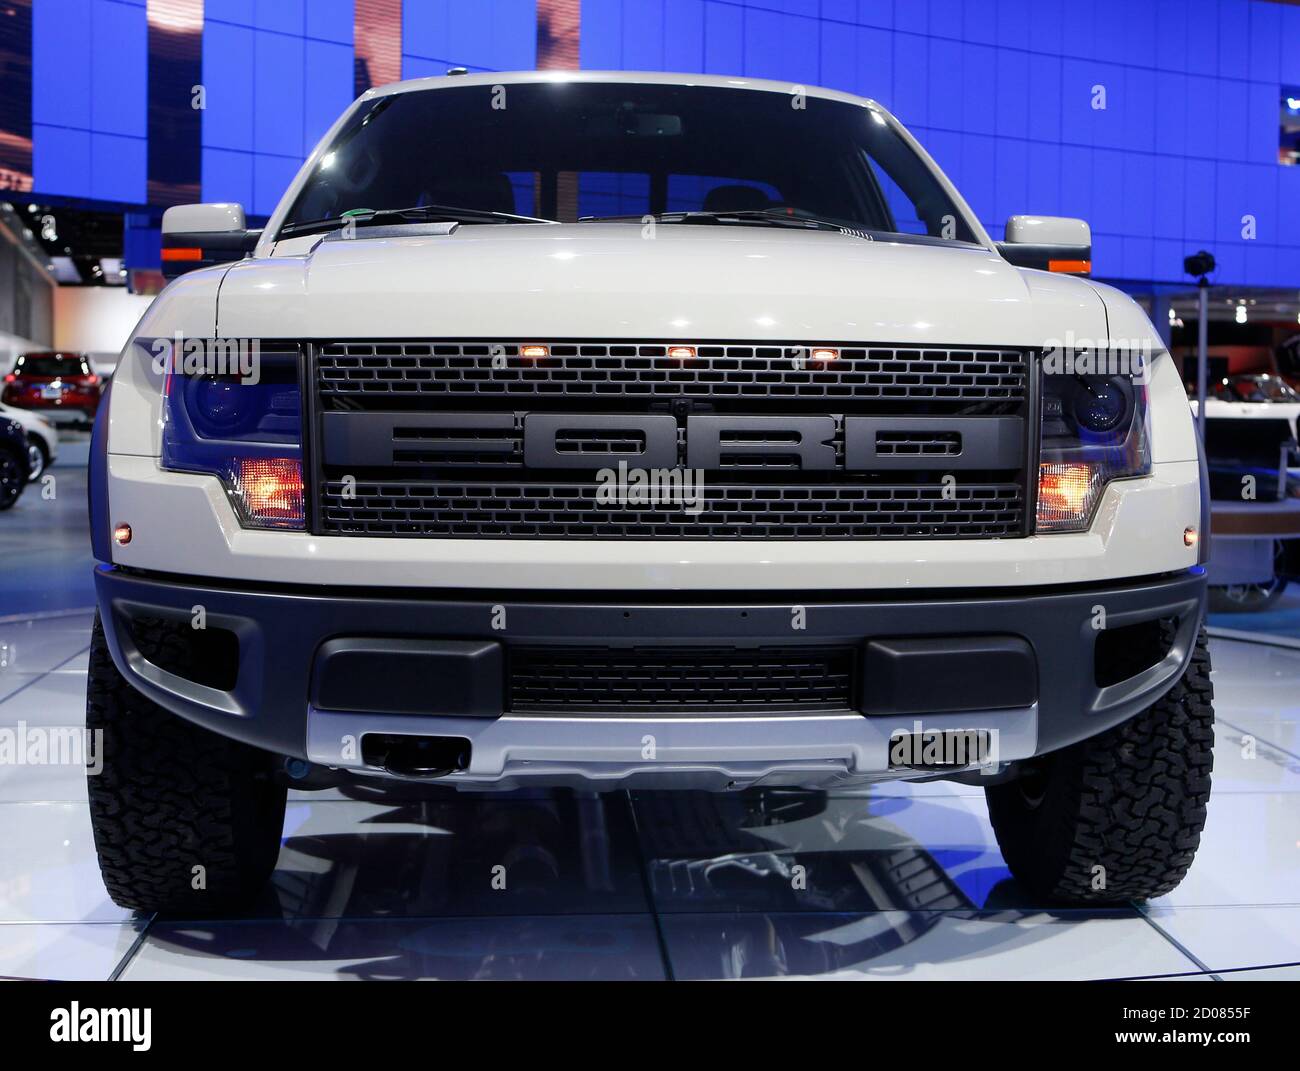 View of the grille and headlights of a 2014 Ford SVT Raptor on display during the press preview day of the North American International Auto Show in Detroit, Michigan January 14, 2014. REUTERS/Rebecca Cook (UNITED STATES  - Tags: TRANSPORT BUSINESS) Stock Photo